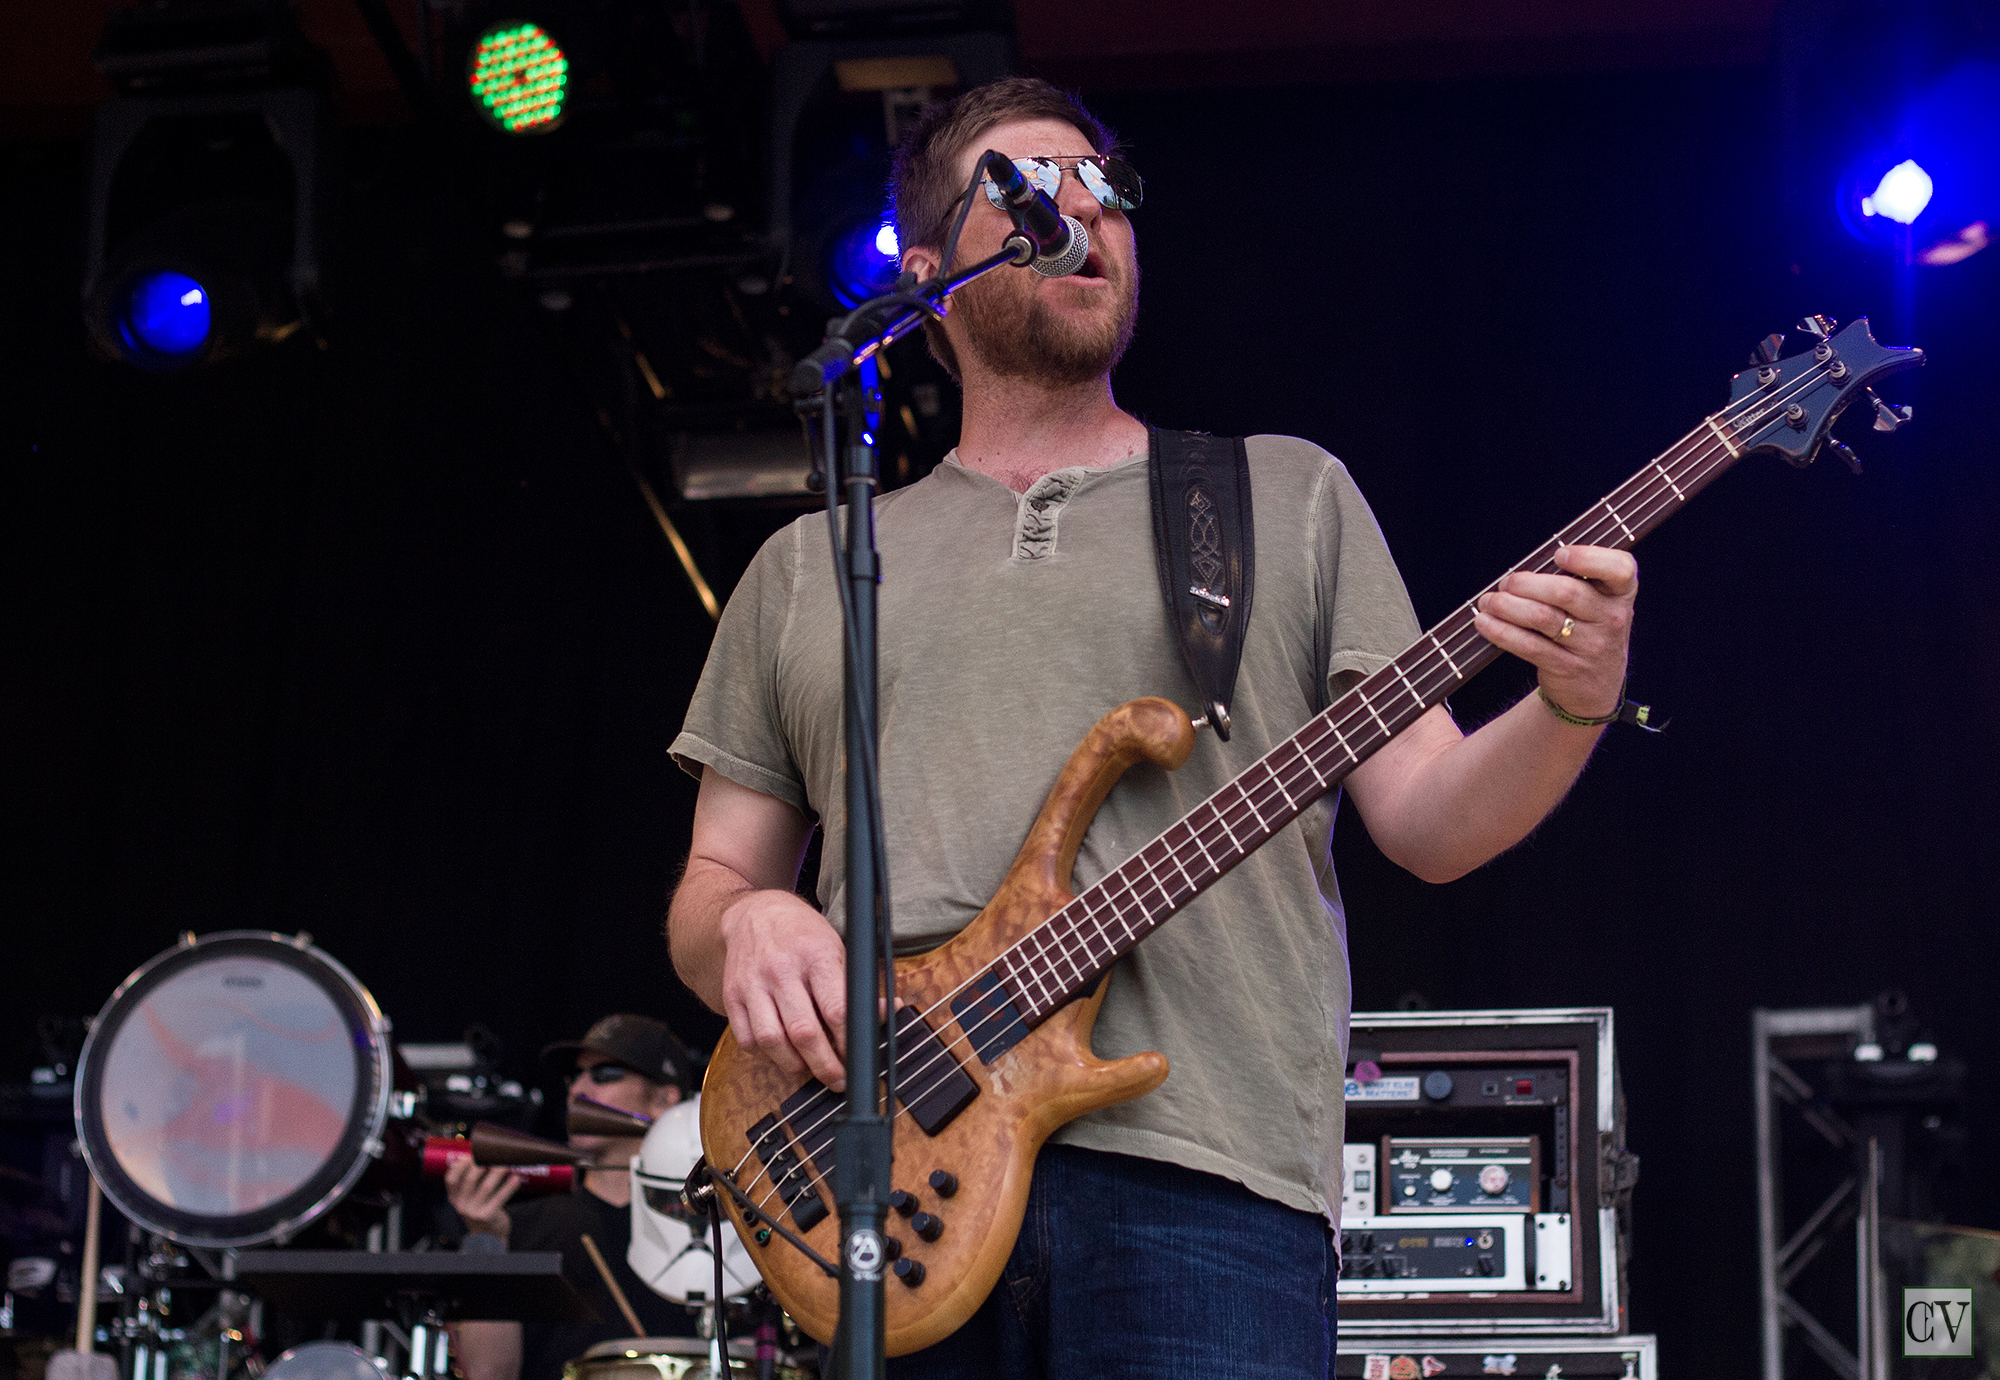 Robert Derhak, bassist for Moe. performing at Summer Camp Music Festival. Photo by: Matthew McGuire